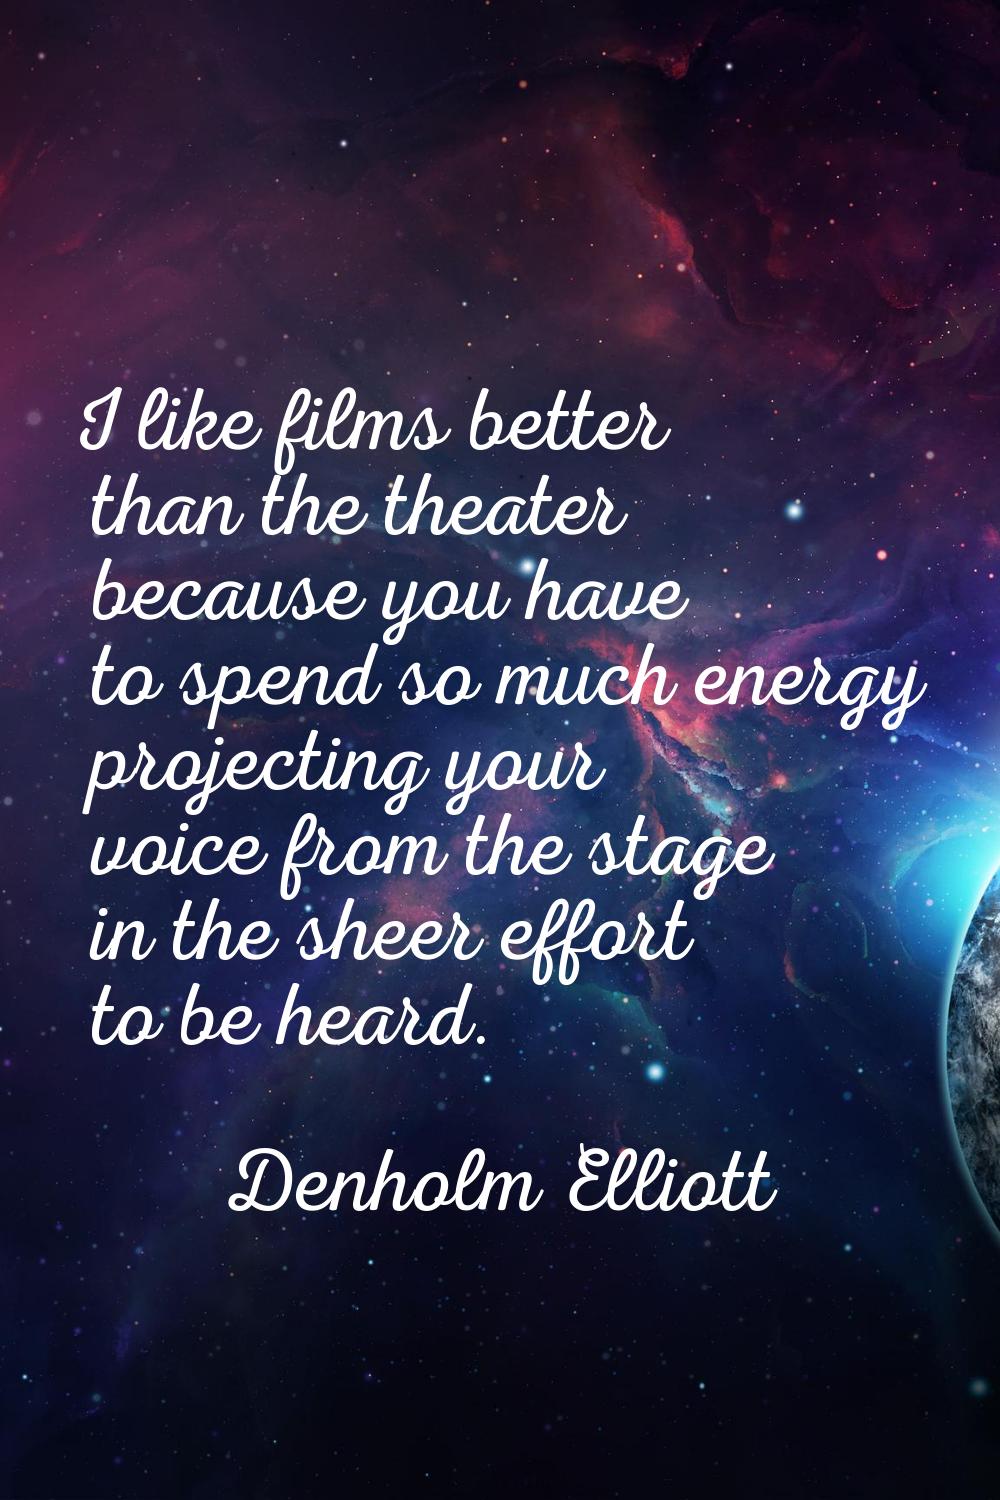 I like films better than the theater because you have to spend so much energy projecting your voice